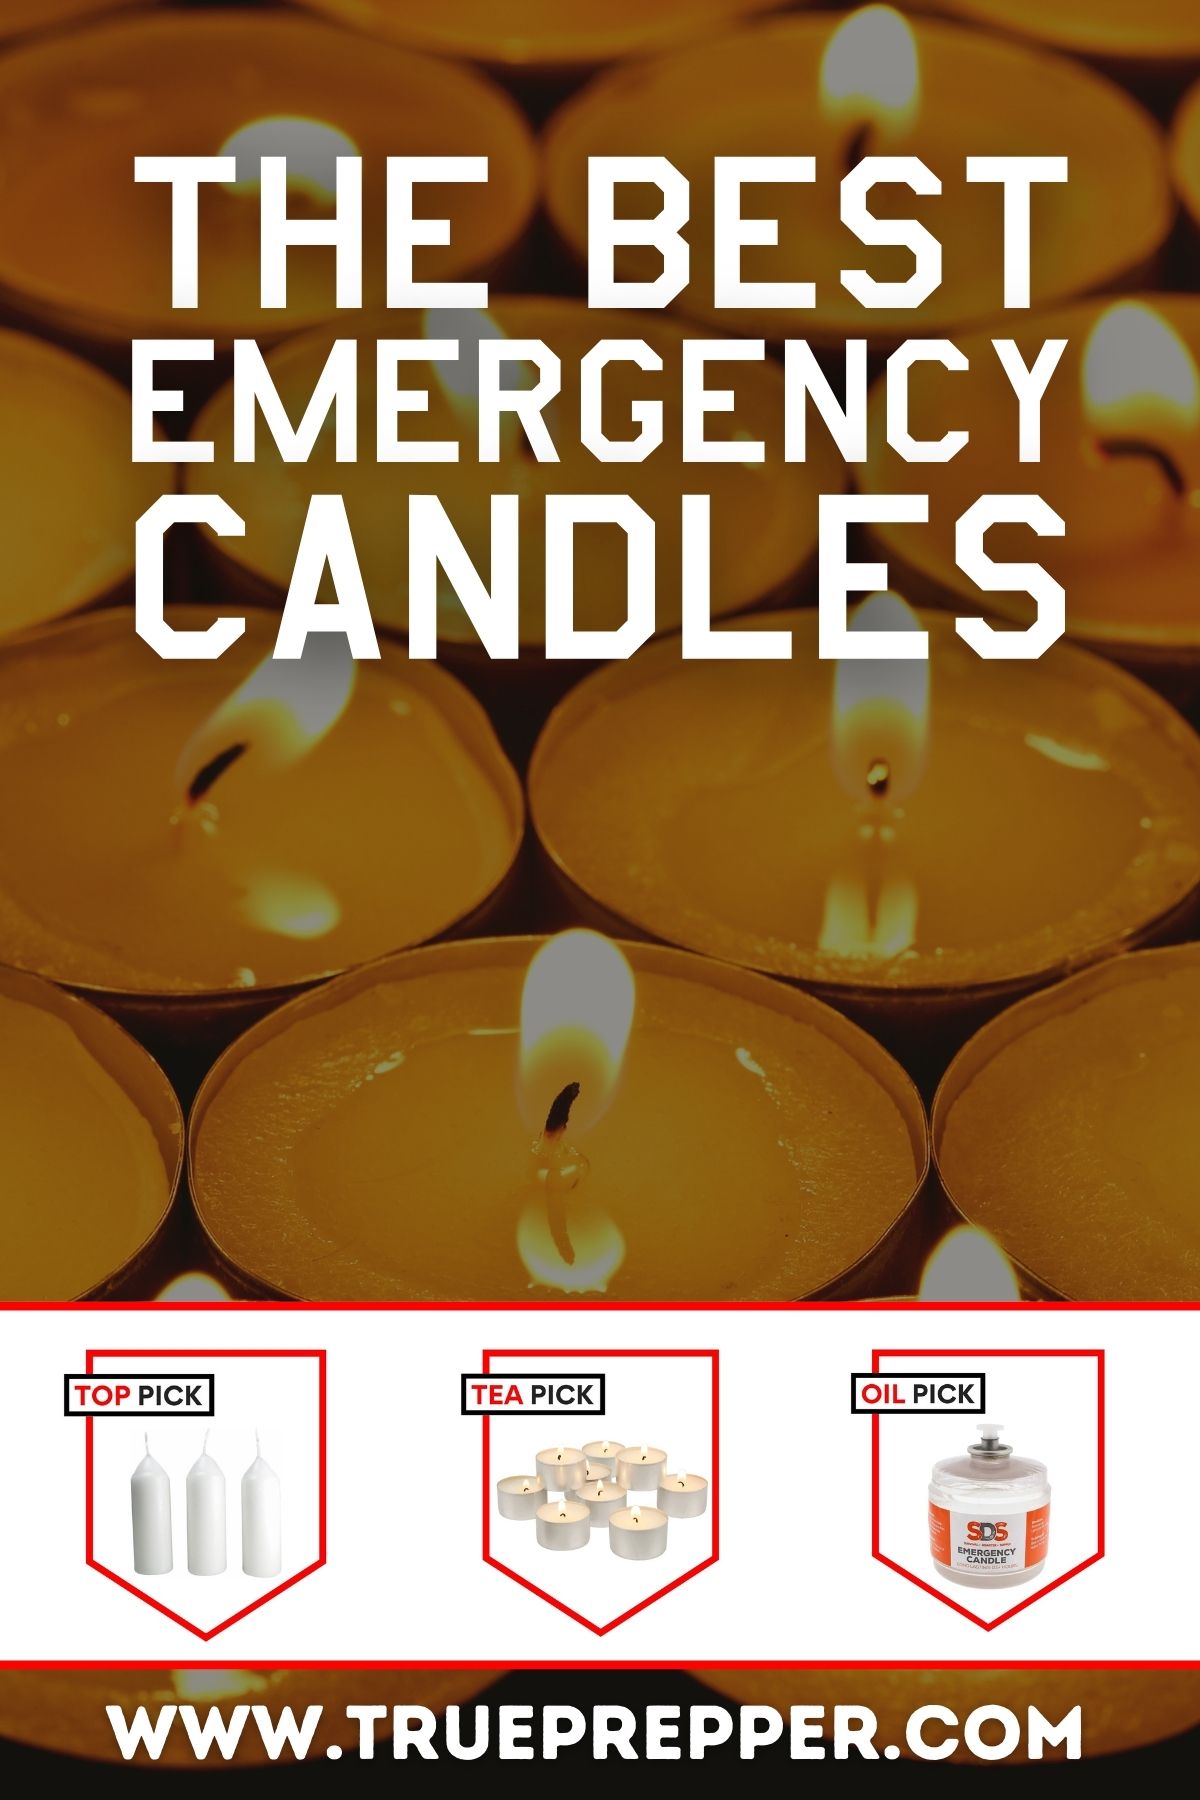 Fire Safety Tips to Follow During Power Outages - National Candle